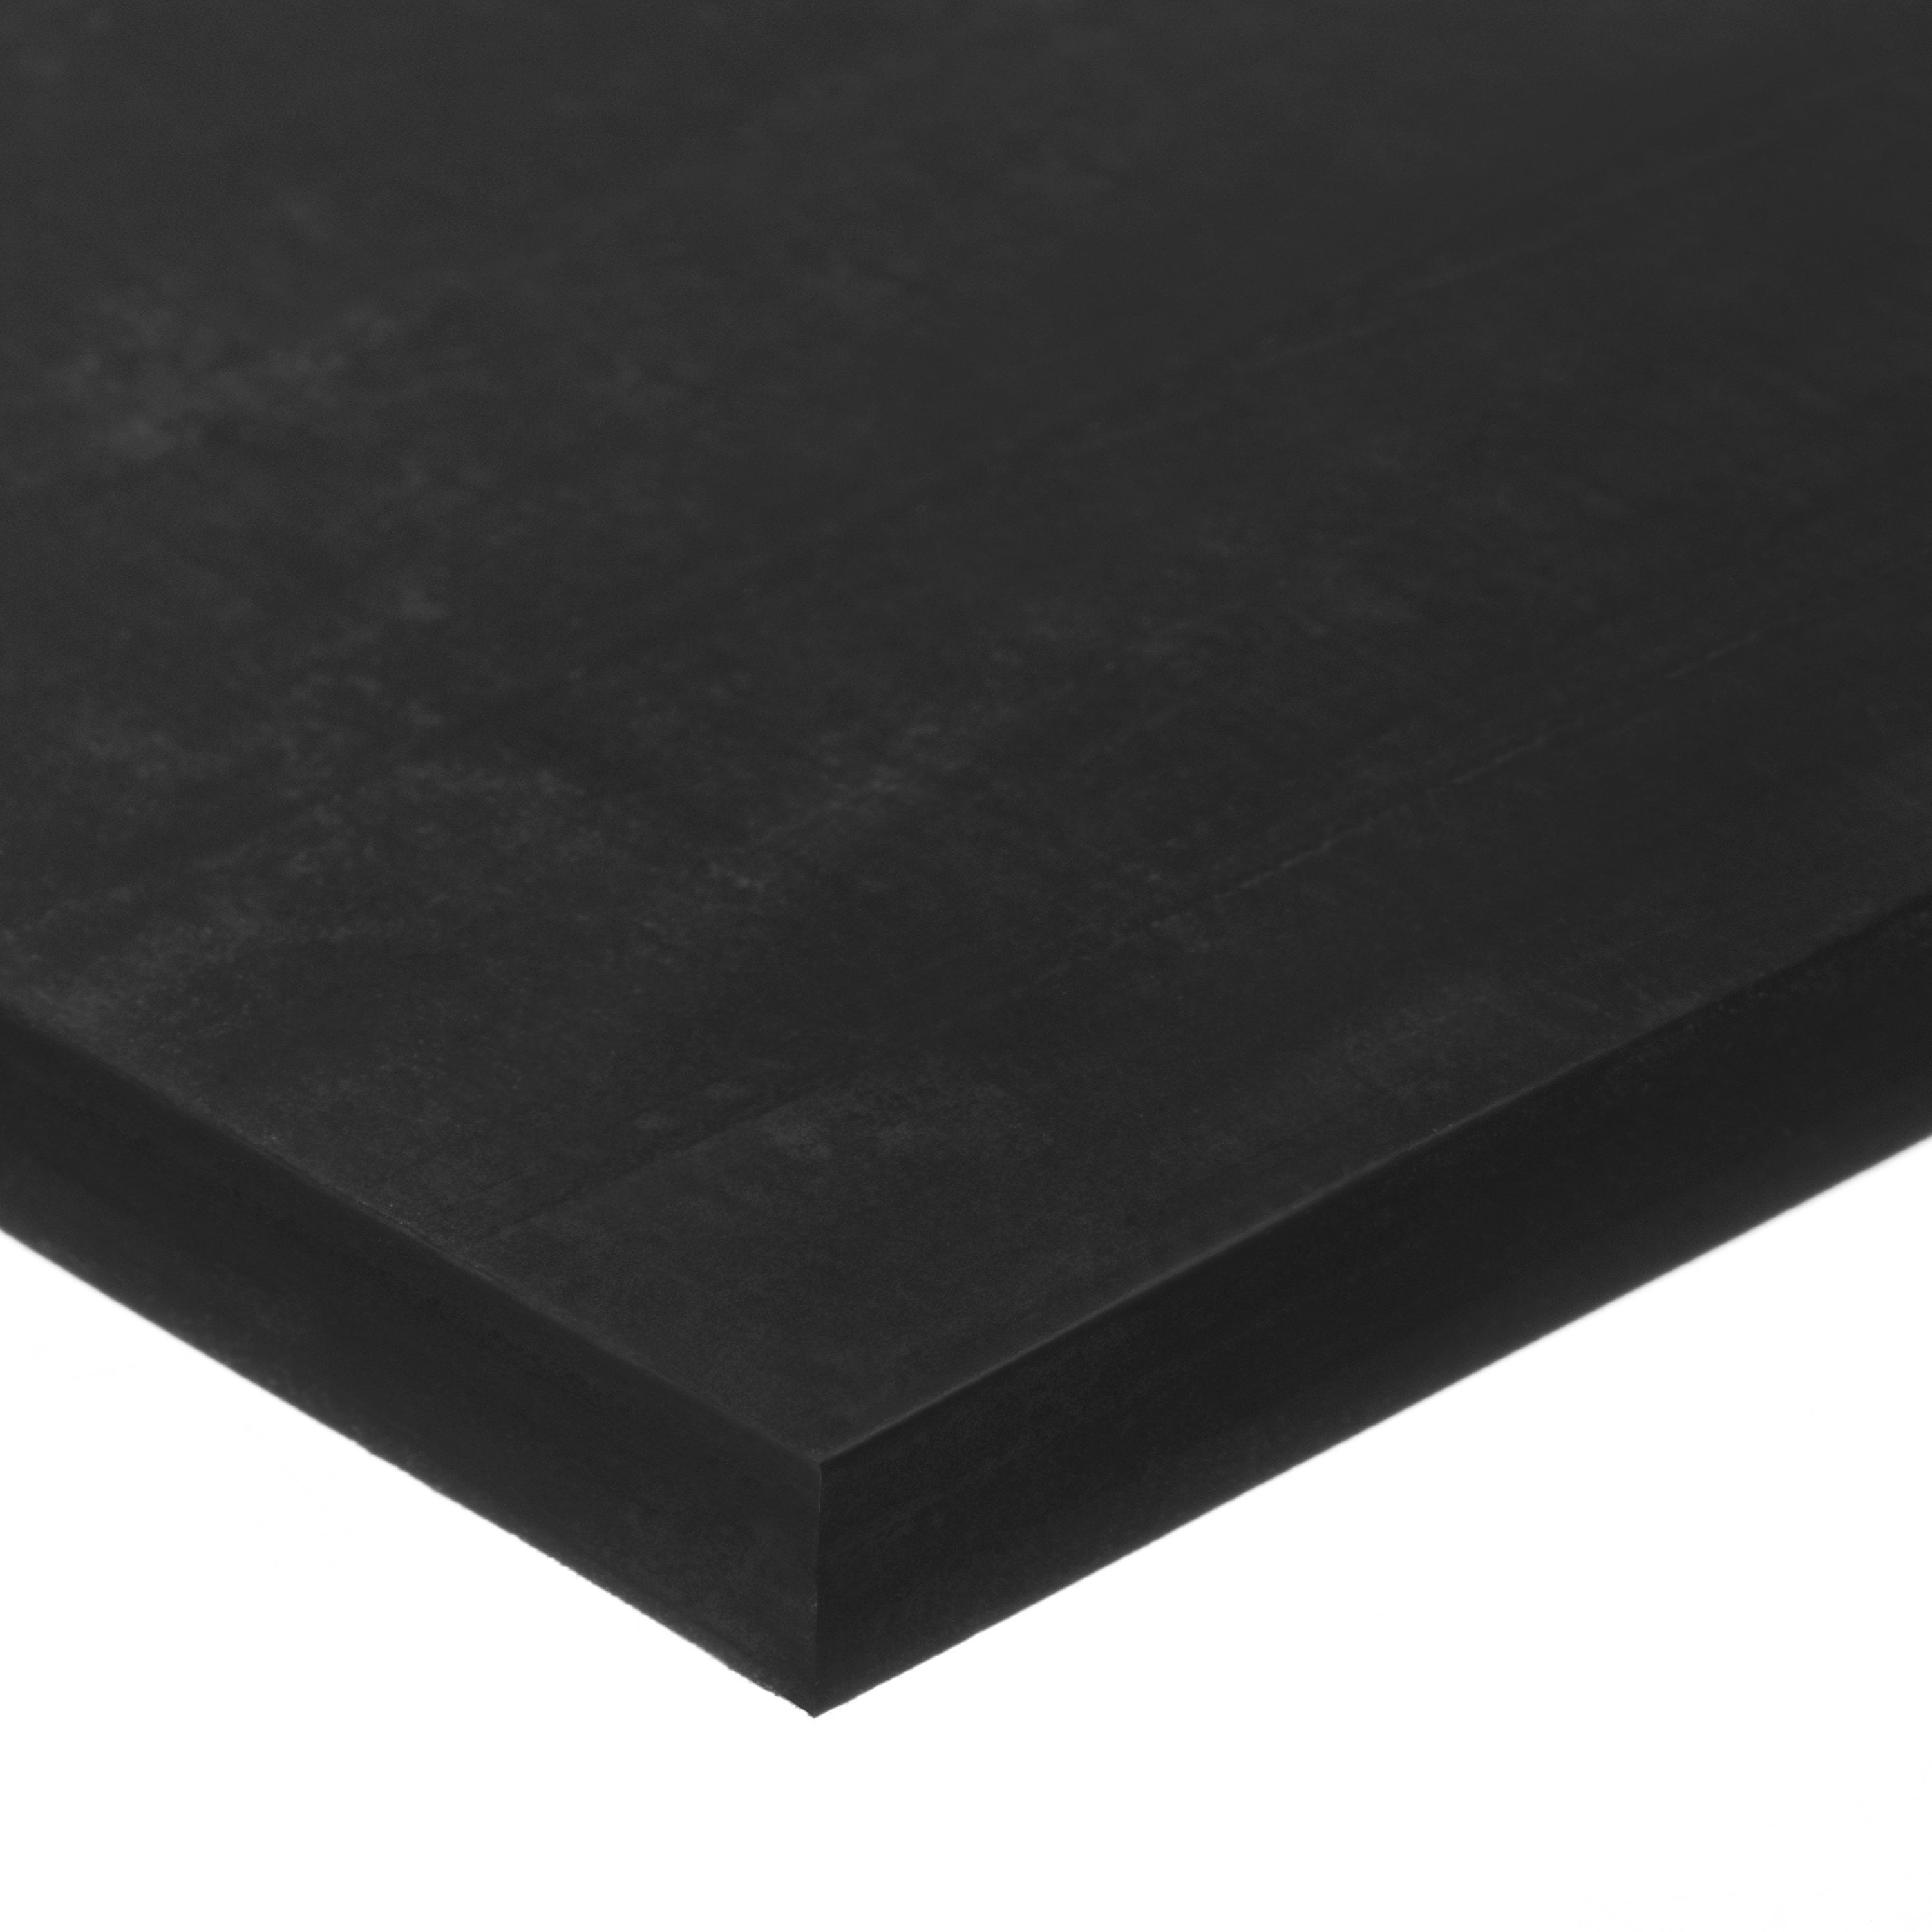 50A 3/4 Thick x 6 Wide x 12 Long Neoprene Rubber Sheet No Adhesive